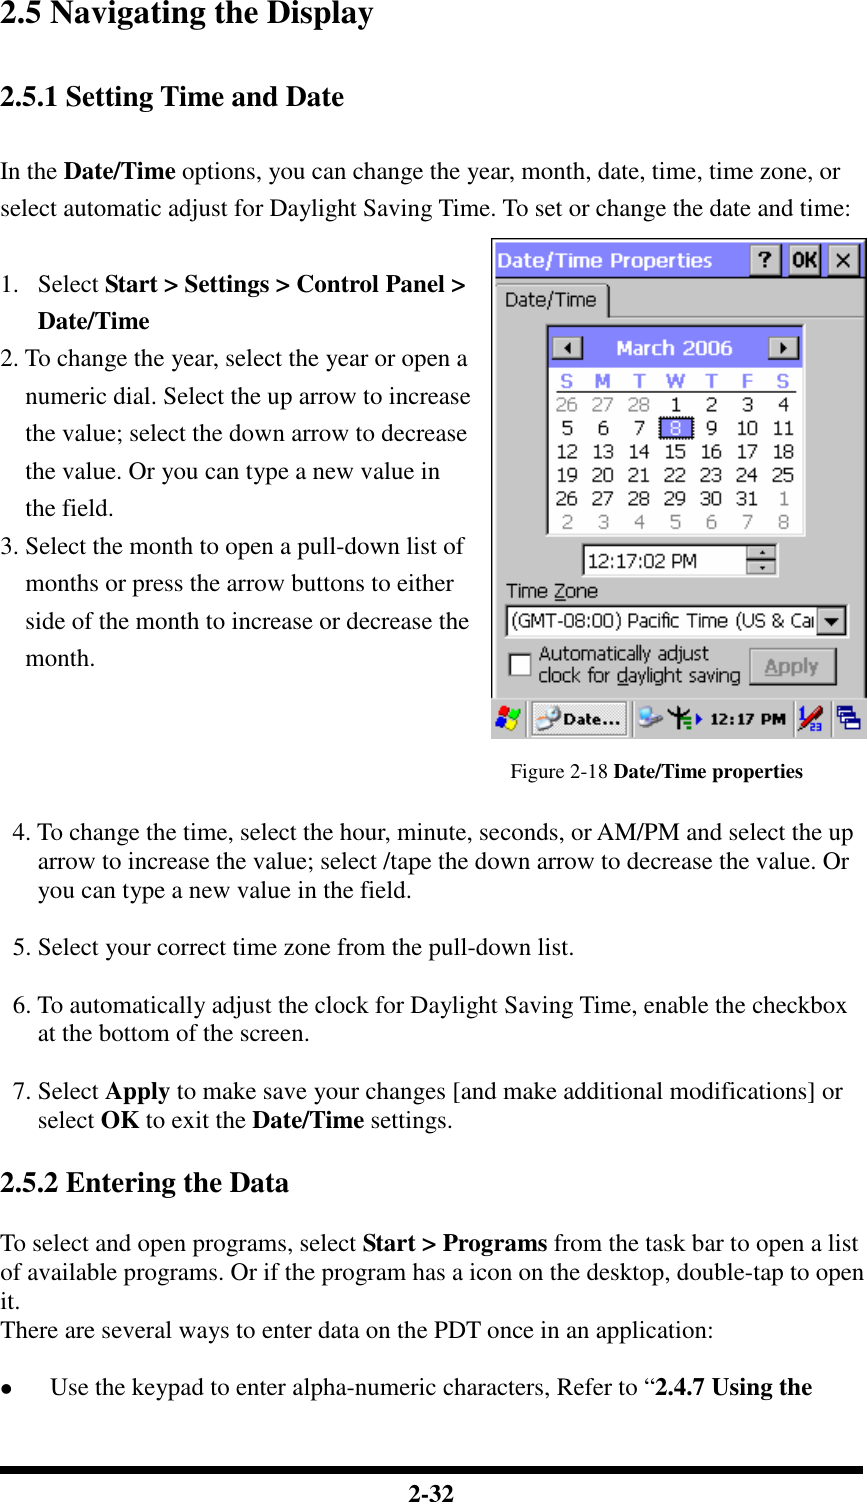  2-32 2.5 Navigating the Display  2.5.1 Setting Time and Date  In the Date/Time options, you can change the year, month, date, time, time zone, or select automatic adjust for Daylight Saving Time. To set or change the date and time:  1. Select Start &gt; Settings &gt; Control Panel &gt; Date/Time 2. To change the year, select the year or open a numeric dial. Select the up arrow to increase the value; select the down arrow to decrease the value. Or you can type a new value in the field. 3. Select the month to open a pull-down list of months or press the arrow buttons to either side of the month to increase or decrease the month.   Figure 2-18 Date/Time properties    4. To change the time, select the hour, minute, seconds, or AM/PM and select the up arrow to increase the value; select /tape the down arrow to decrease the value. Or you can type a new value in the field.    5. Select your correct time zone from the pull-down list.    6. To automatically adjust the clock for Daylight Saving Time, enable the checkbox at the bottom of the screen.    7. Select Apply to make save your changes [and make additional modifications] or select OK to exit the Date/Time settings.  2.5.2 Entering the Data  To select and open programs, select Start &gt; Programs from the task bar to open a list of available programs. Or if the program has a icon on the desktop, double-tap to open it. There are several ways to enter data on the PDT once in an application:   Use the keypad to enter alpha-numeric characters, Refer to “2.4.7 Using the 